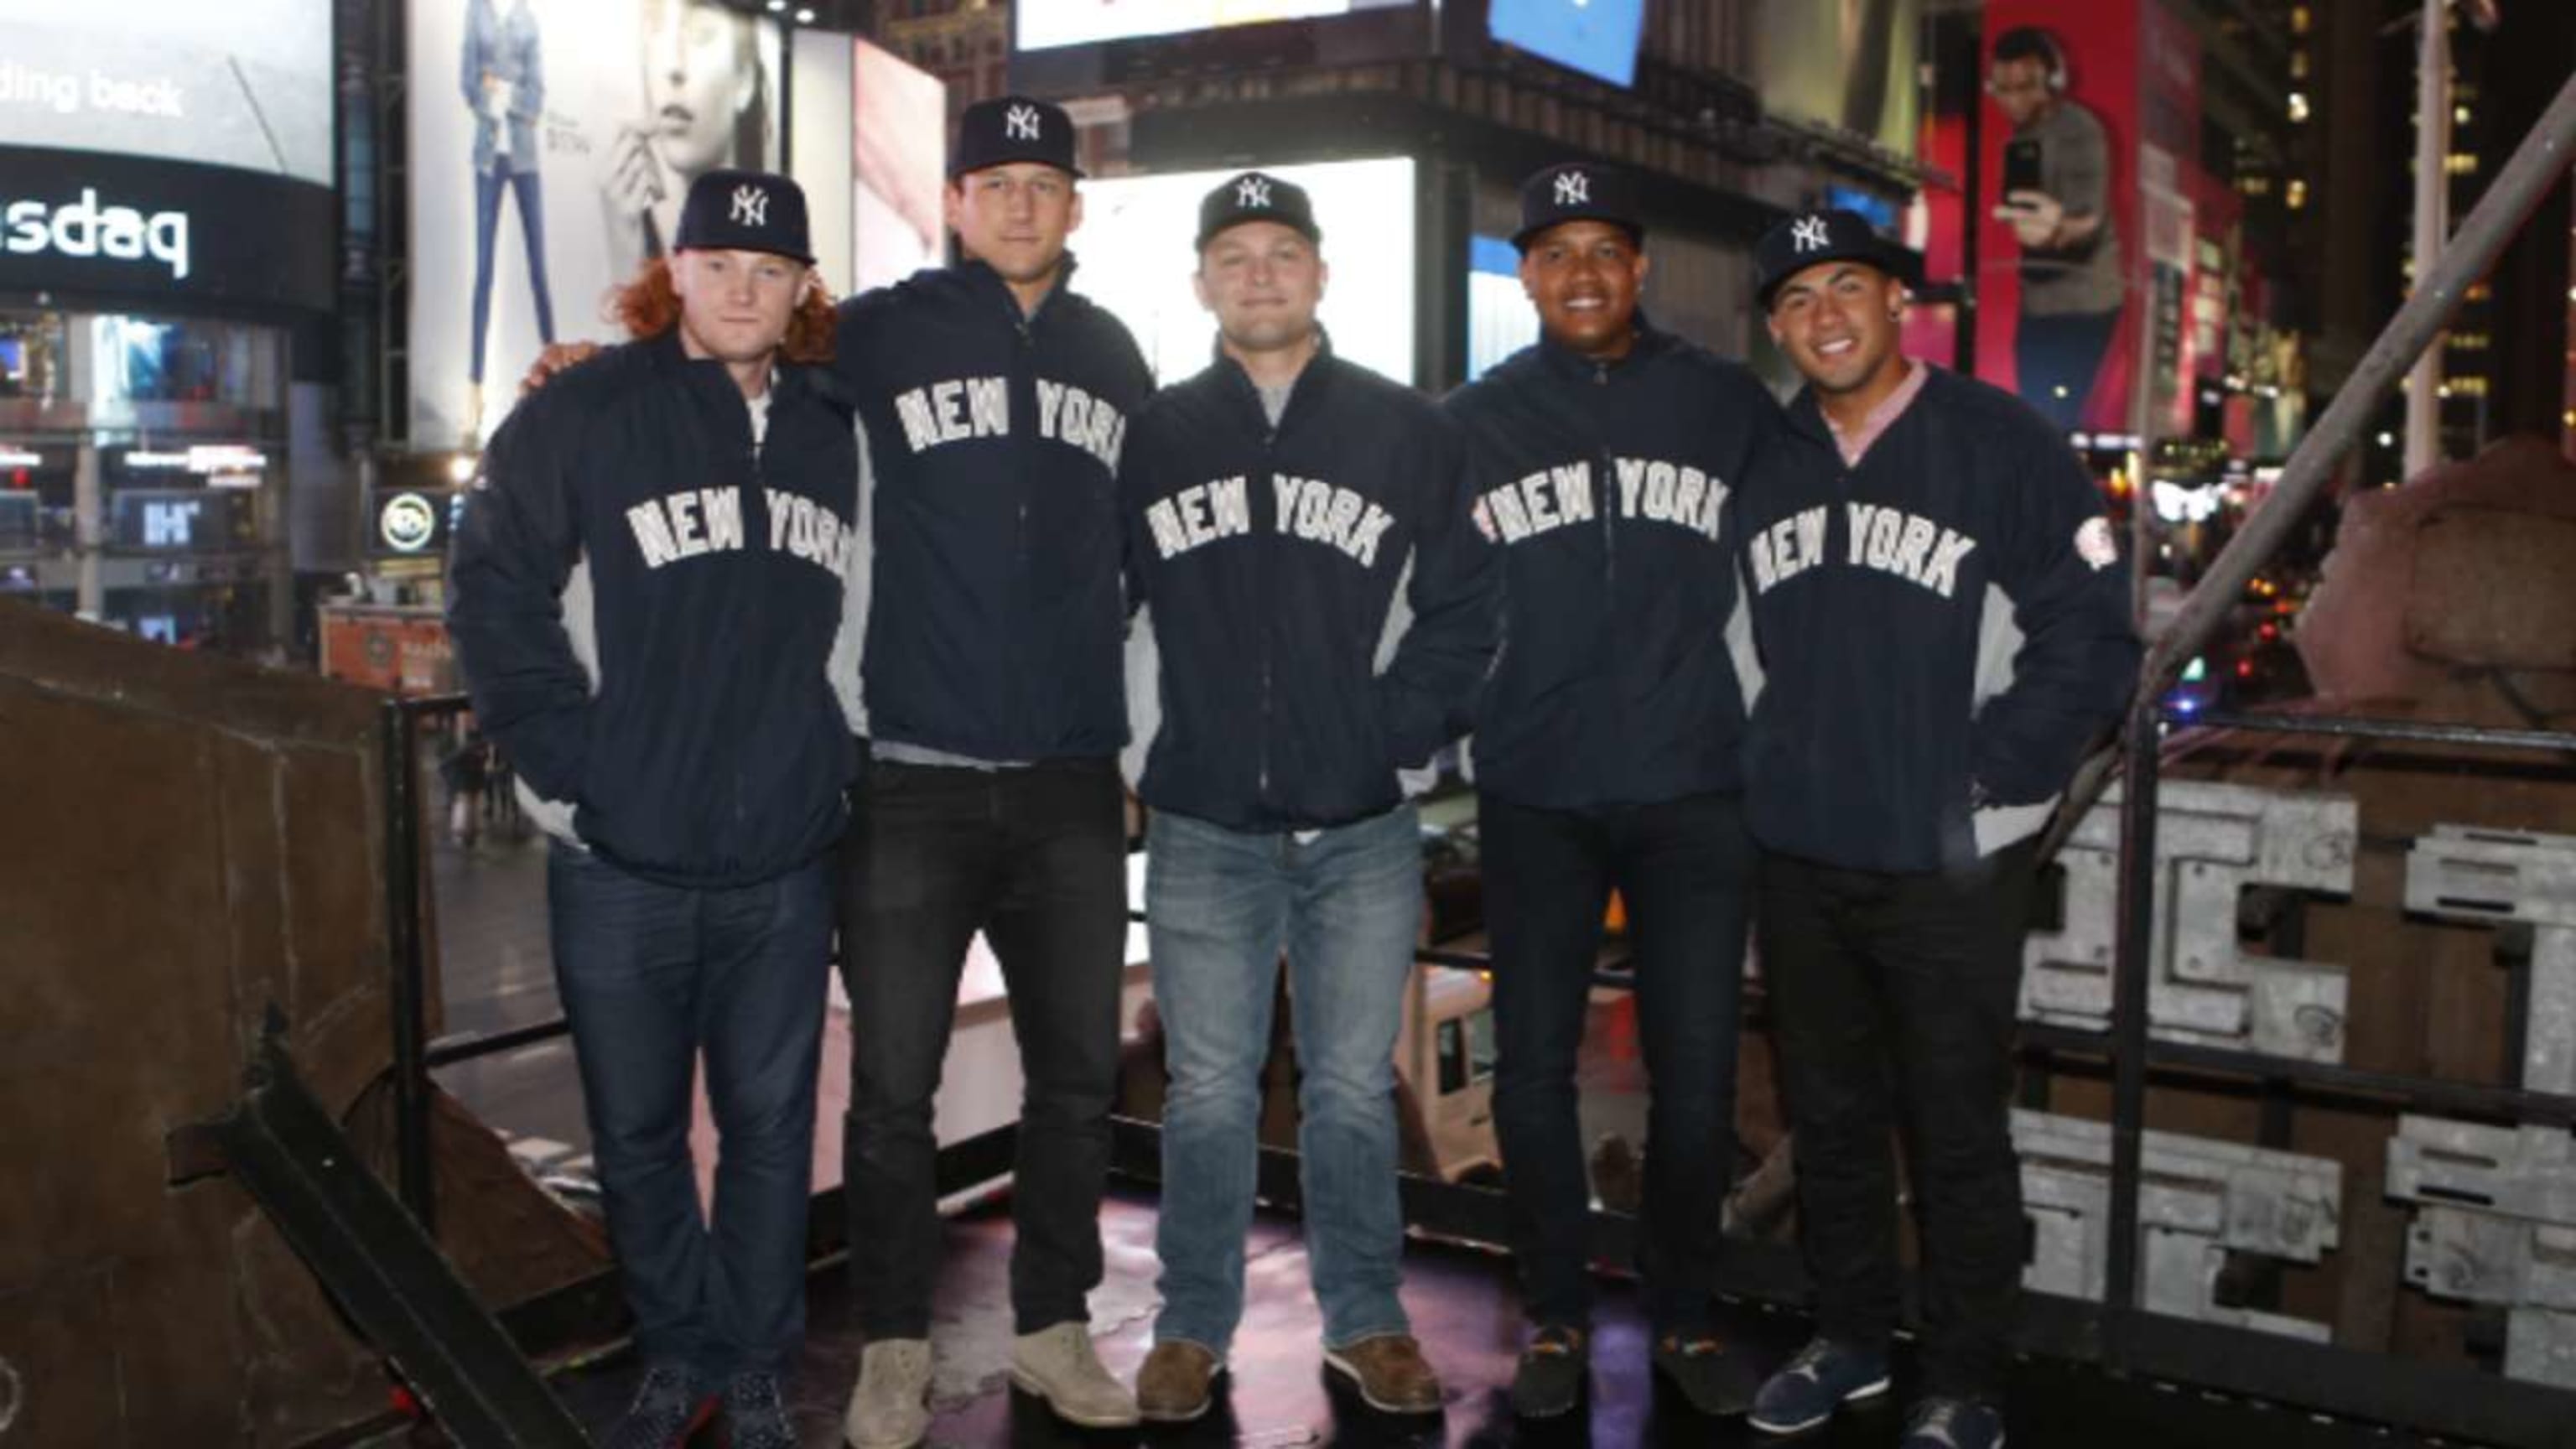 Yankees Surprise Fans and Serve Sandwiches as Part of Winter Warm-Up